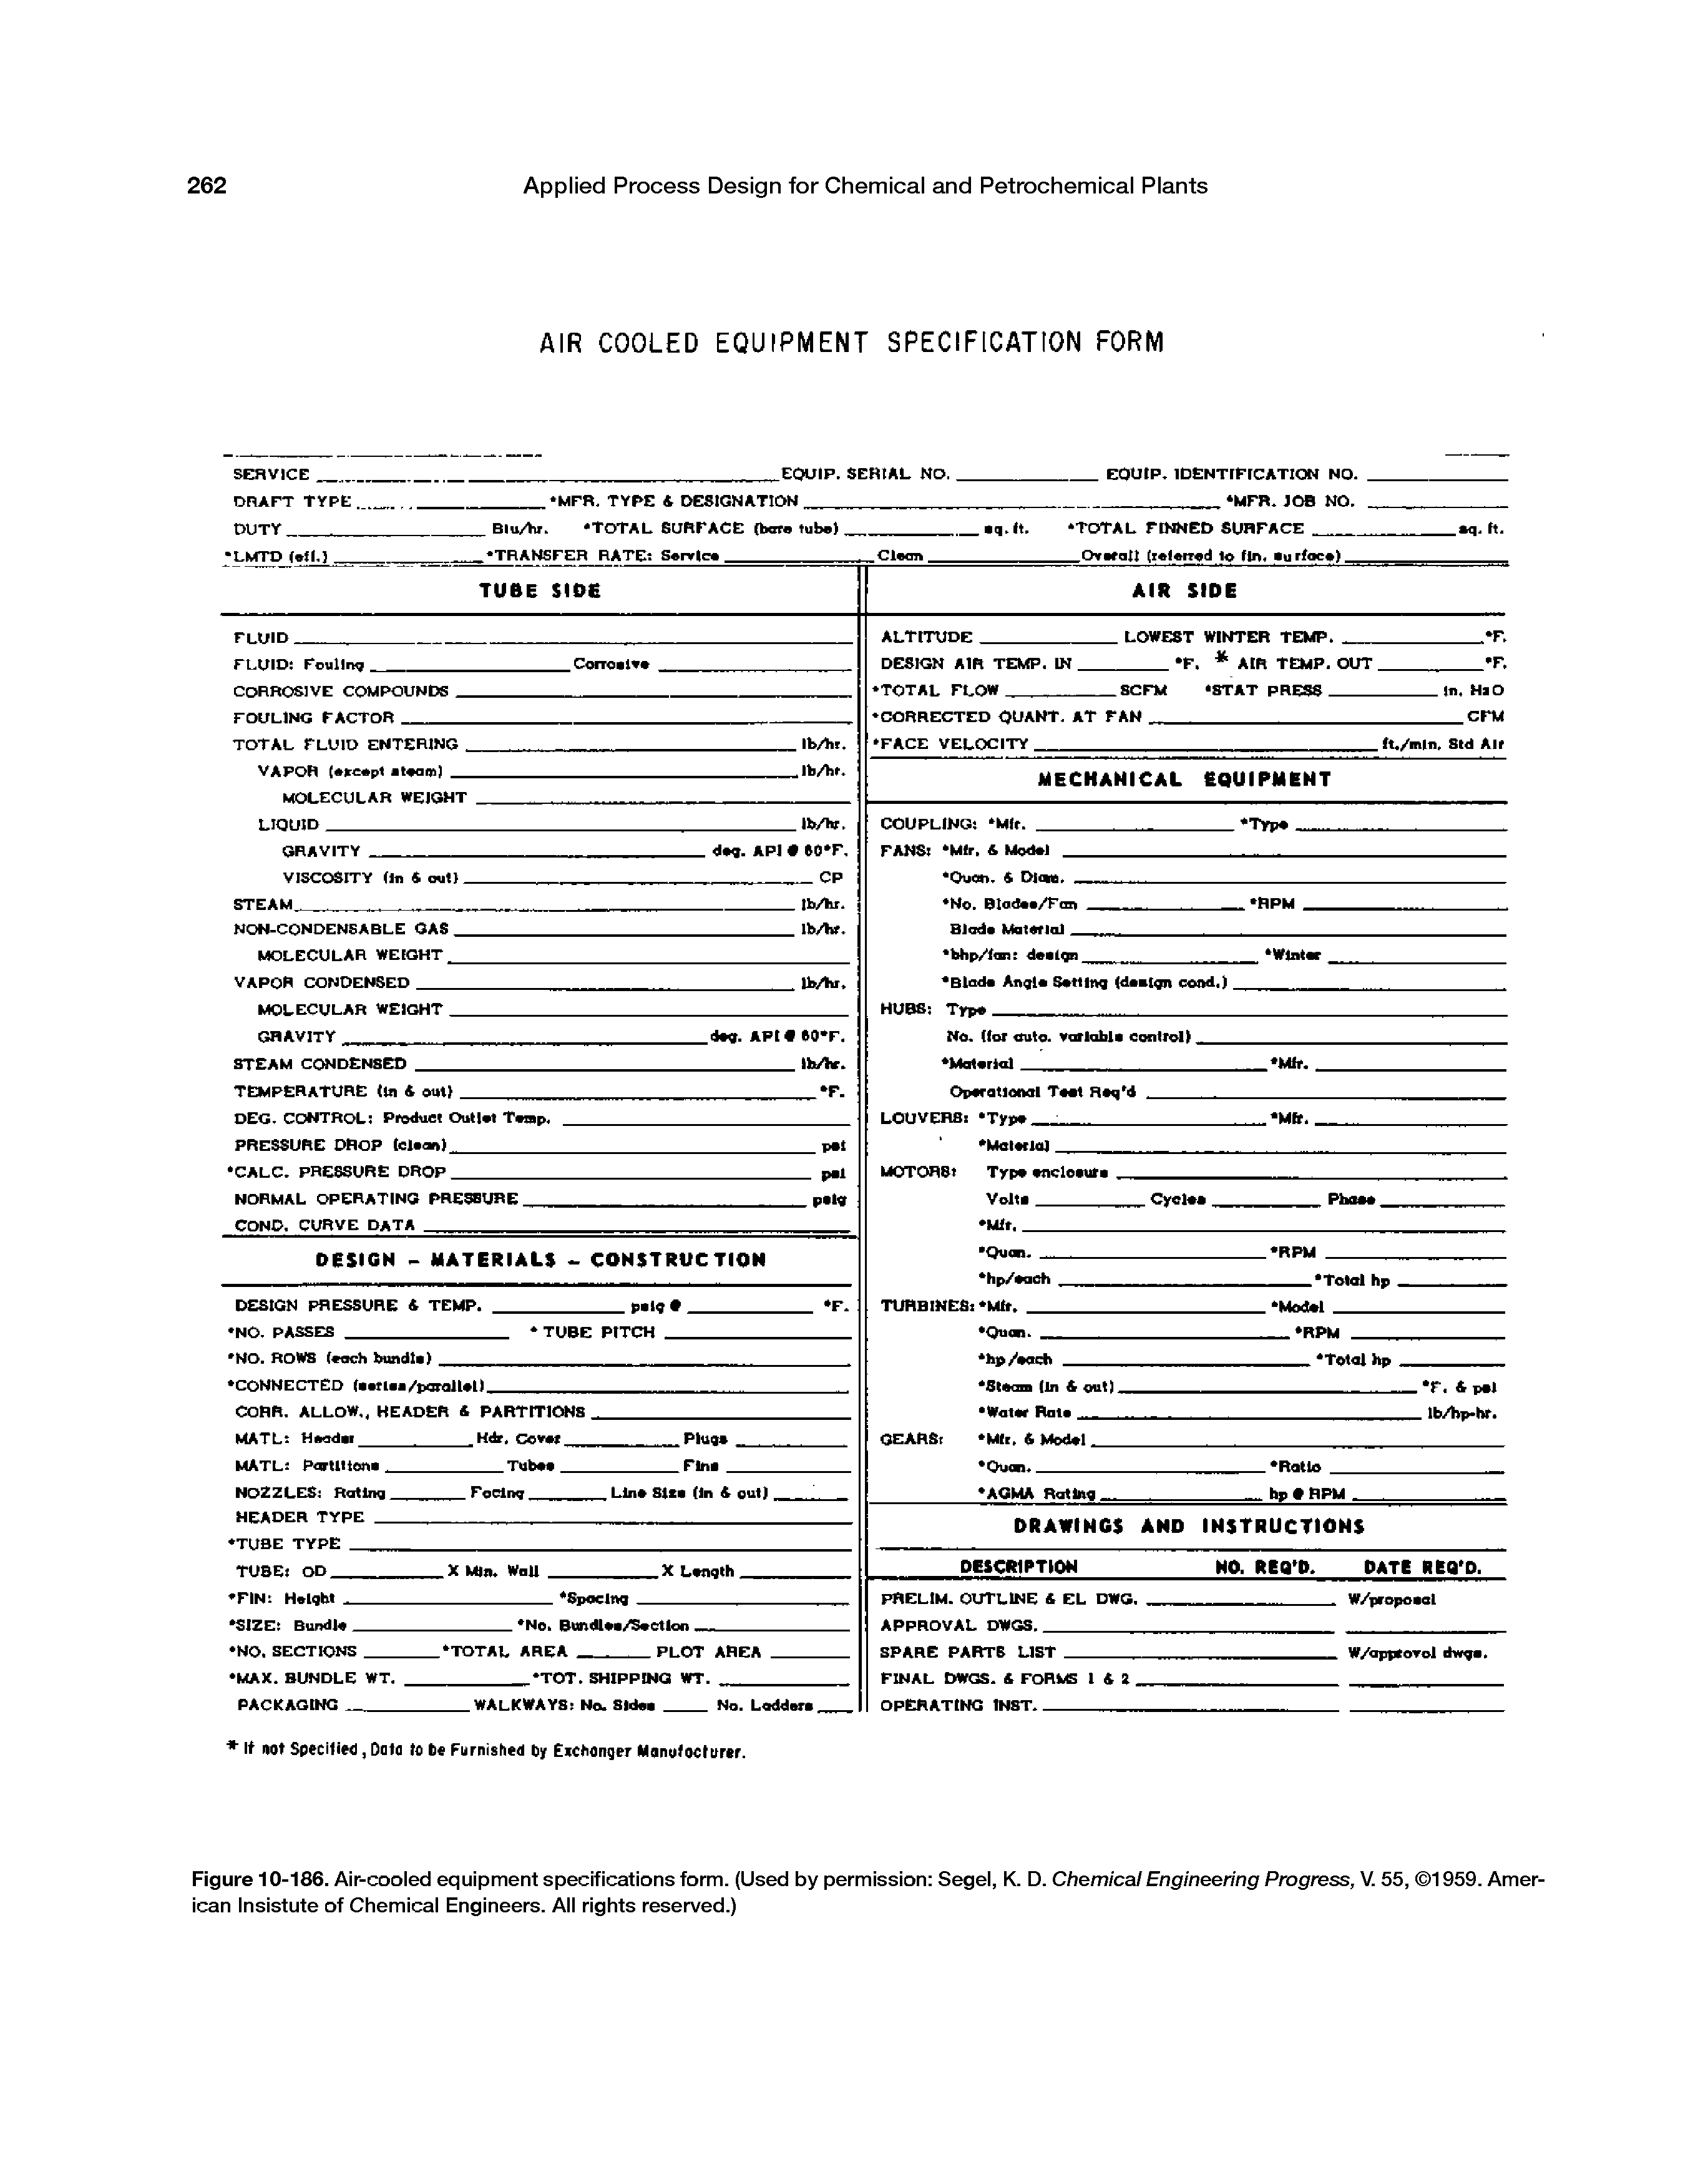 Figure 10-186. Air-cooled equipment specifications form. (Used by permission Segel, K. D. Chemical Engineering Progress, V. 55, 1959. American Insistute of Chemical Engineers. All rights reserved.)...